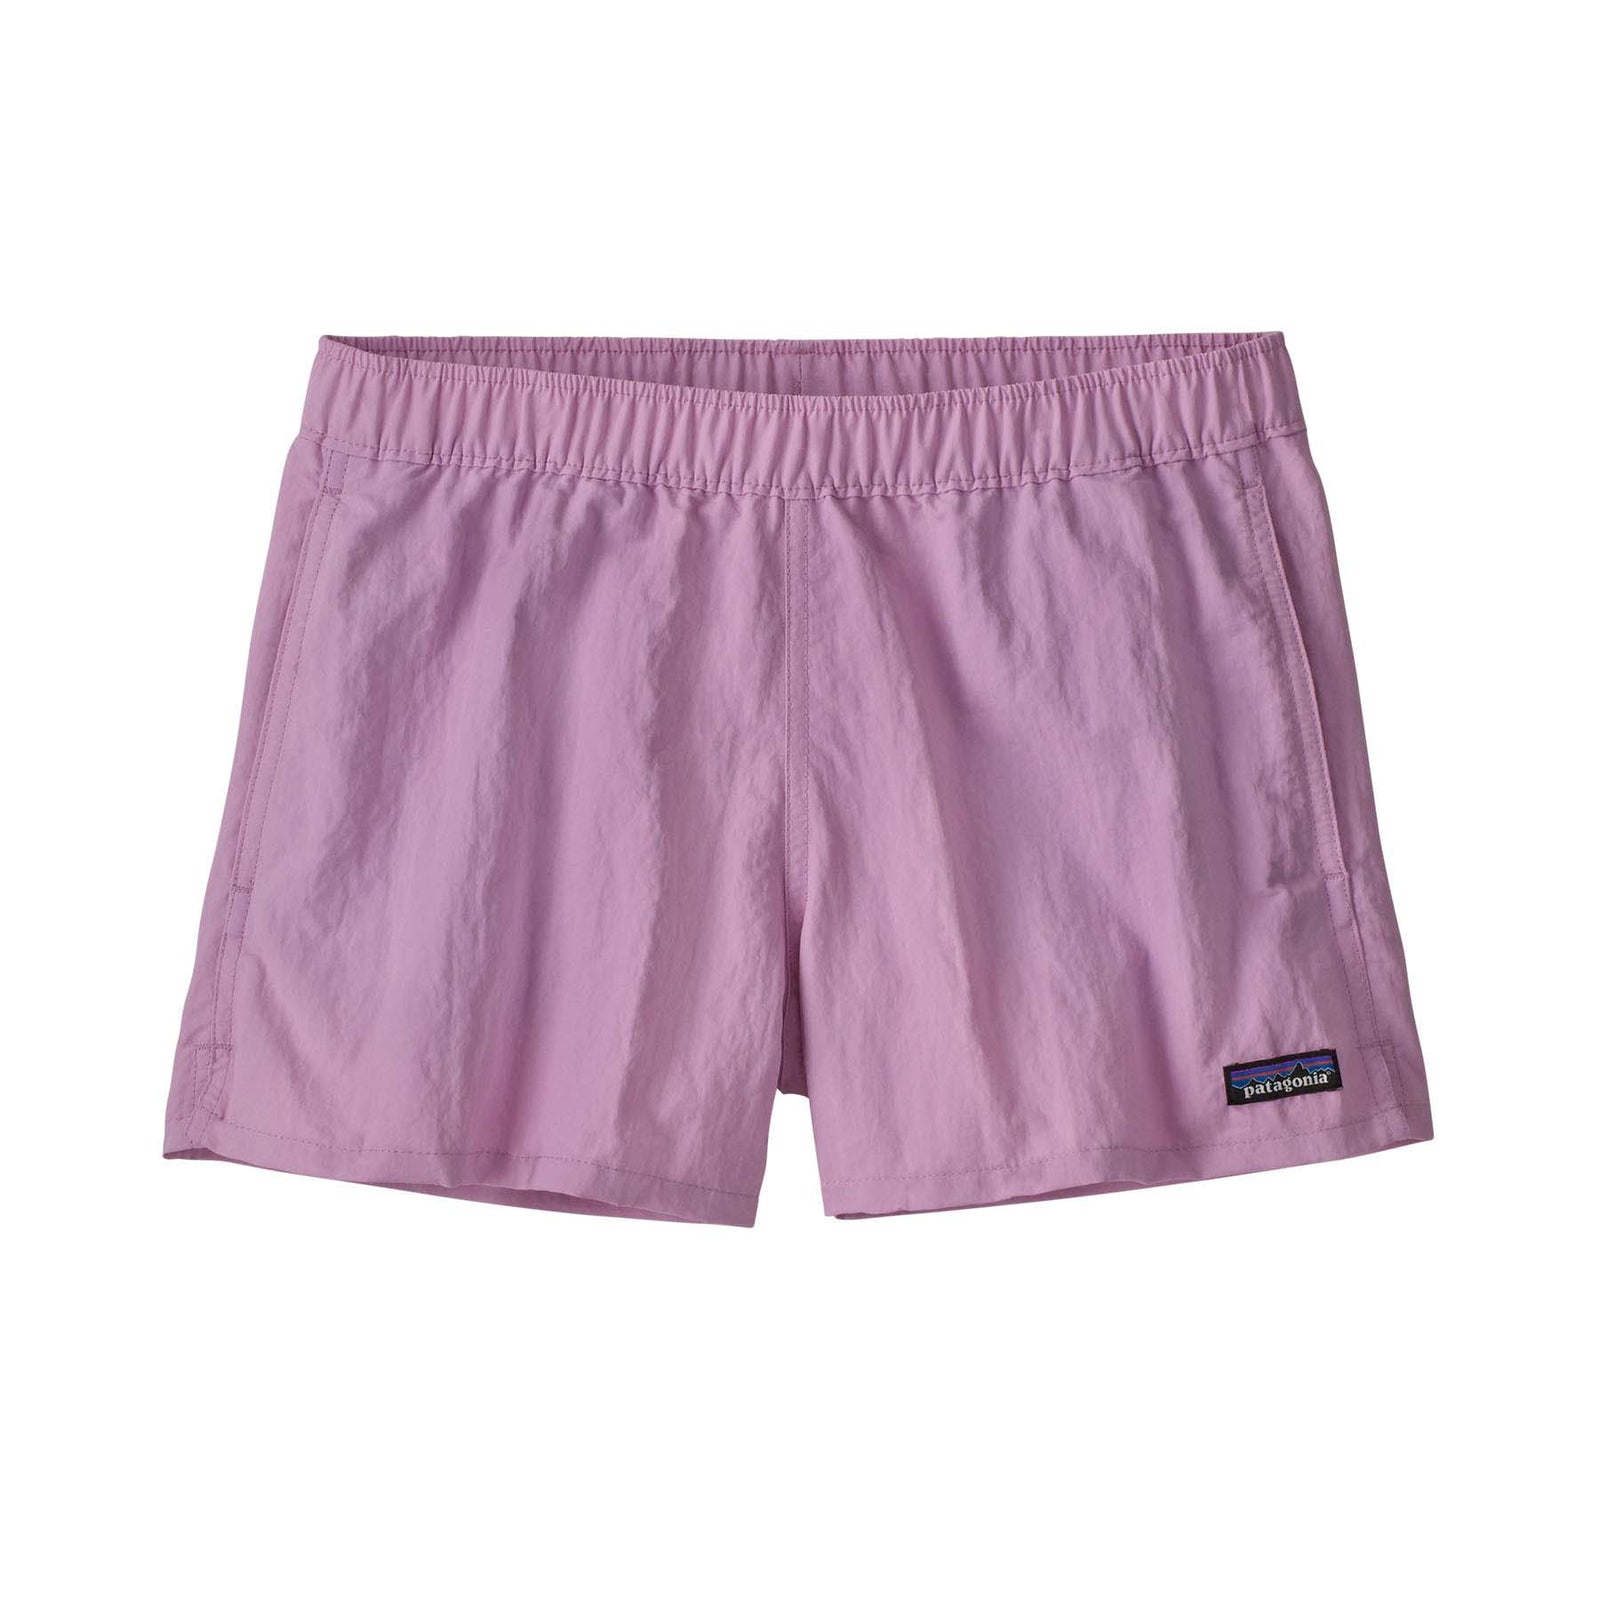 Patagonia Women's Barely Baggies Shorts - 2 1/2 in 2023 STME STEAM BLUE